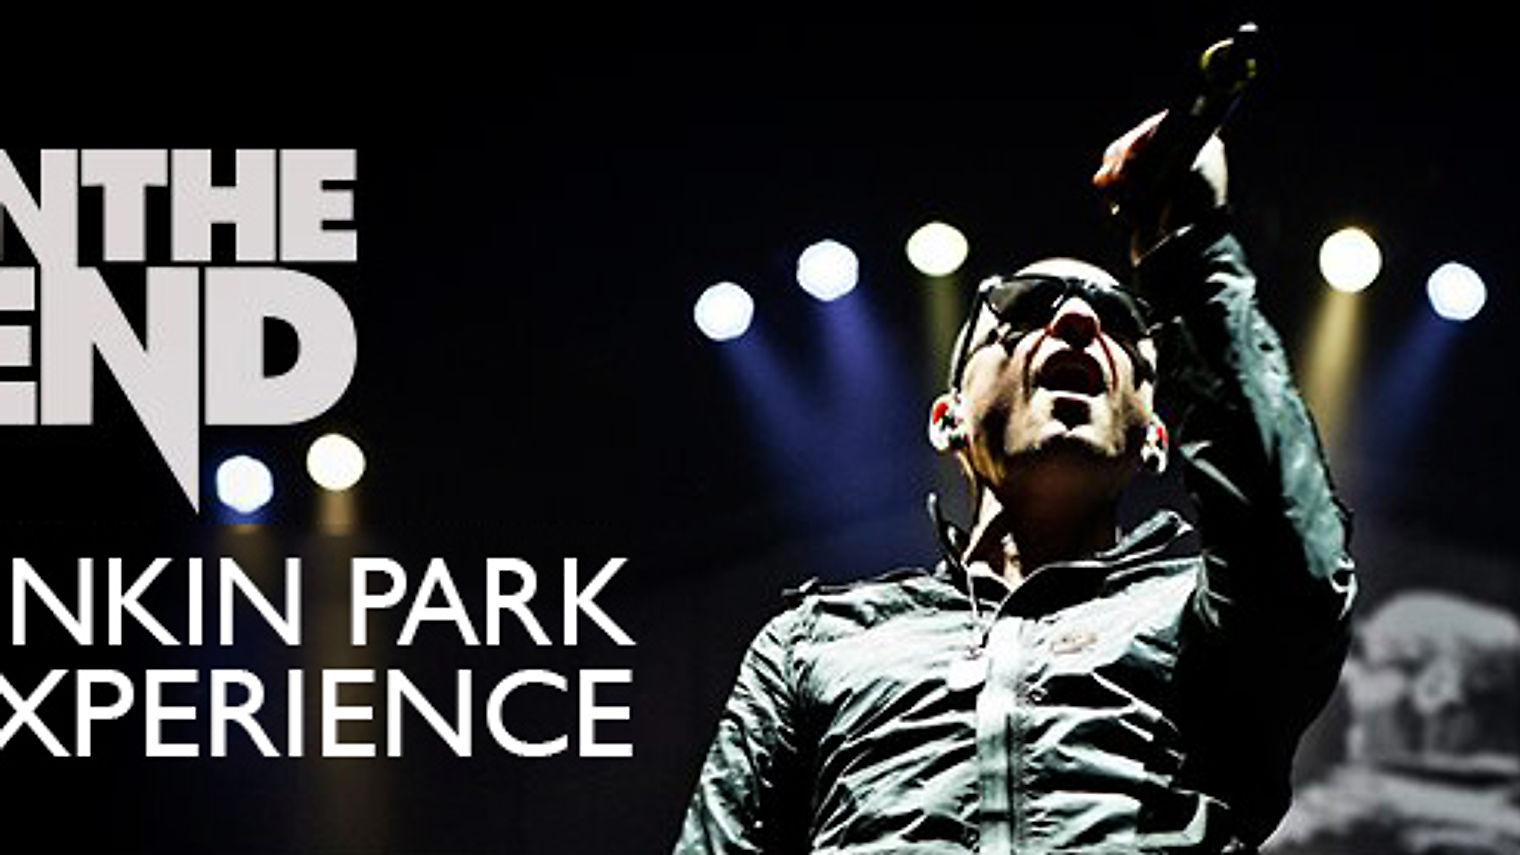 NSE-IN THE END-LINKIN PARK EXPERIENCE 